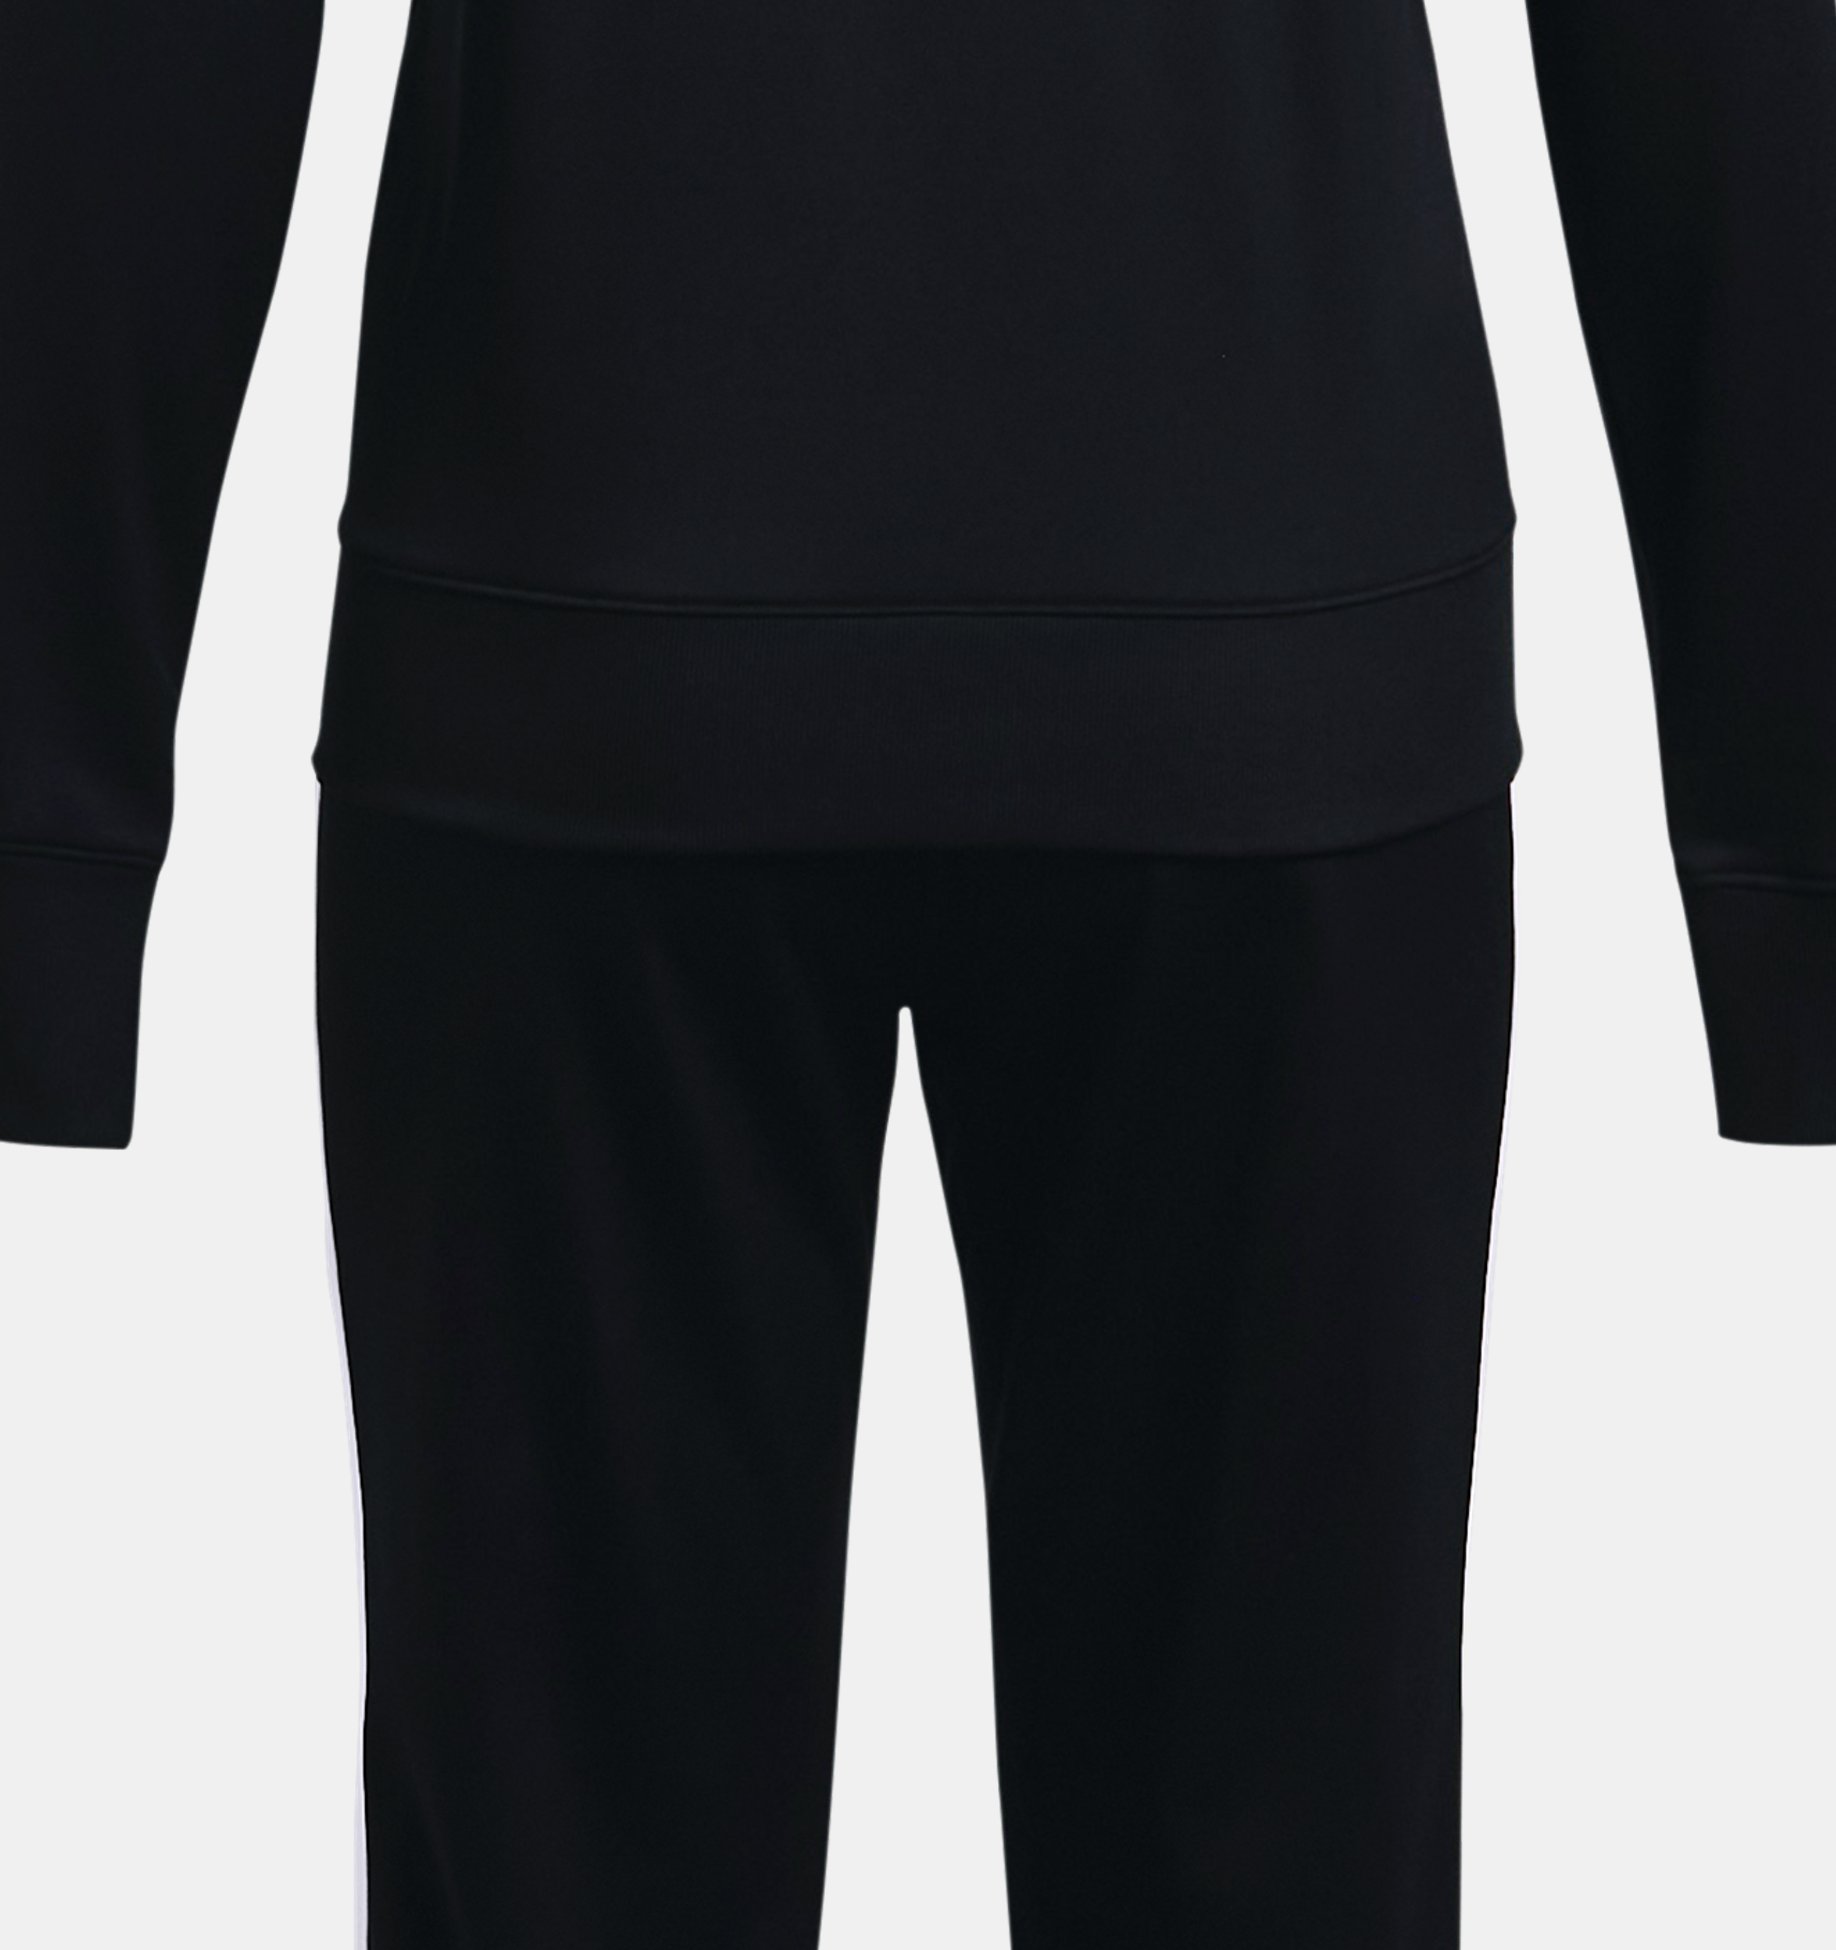 Buy Under Armour Tricot Tracksuit Women Grey online